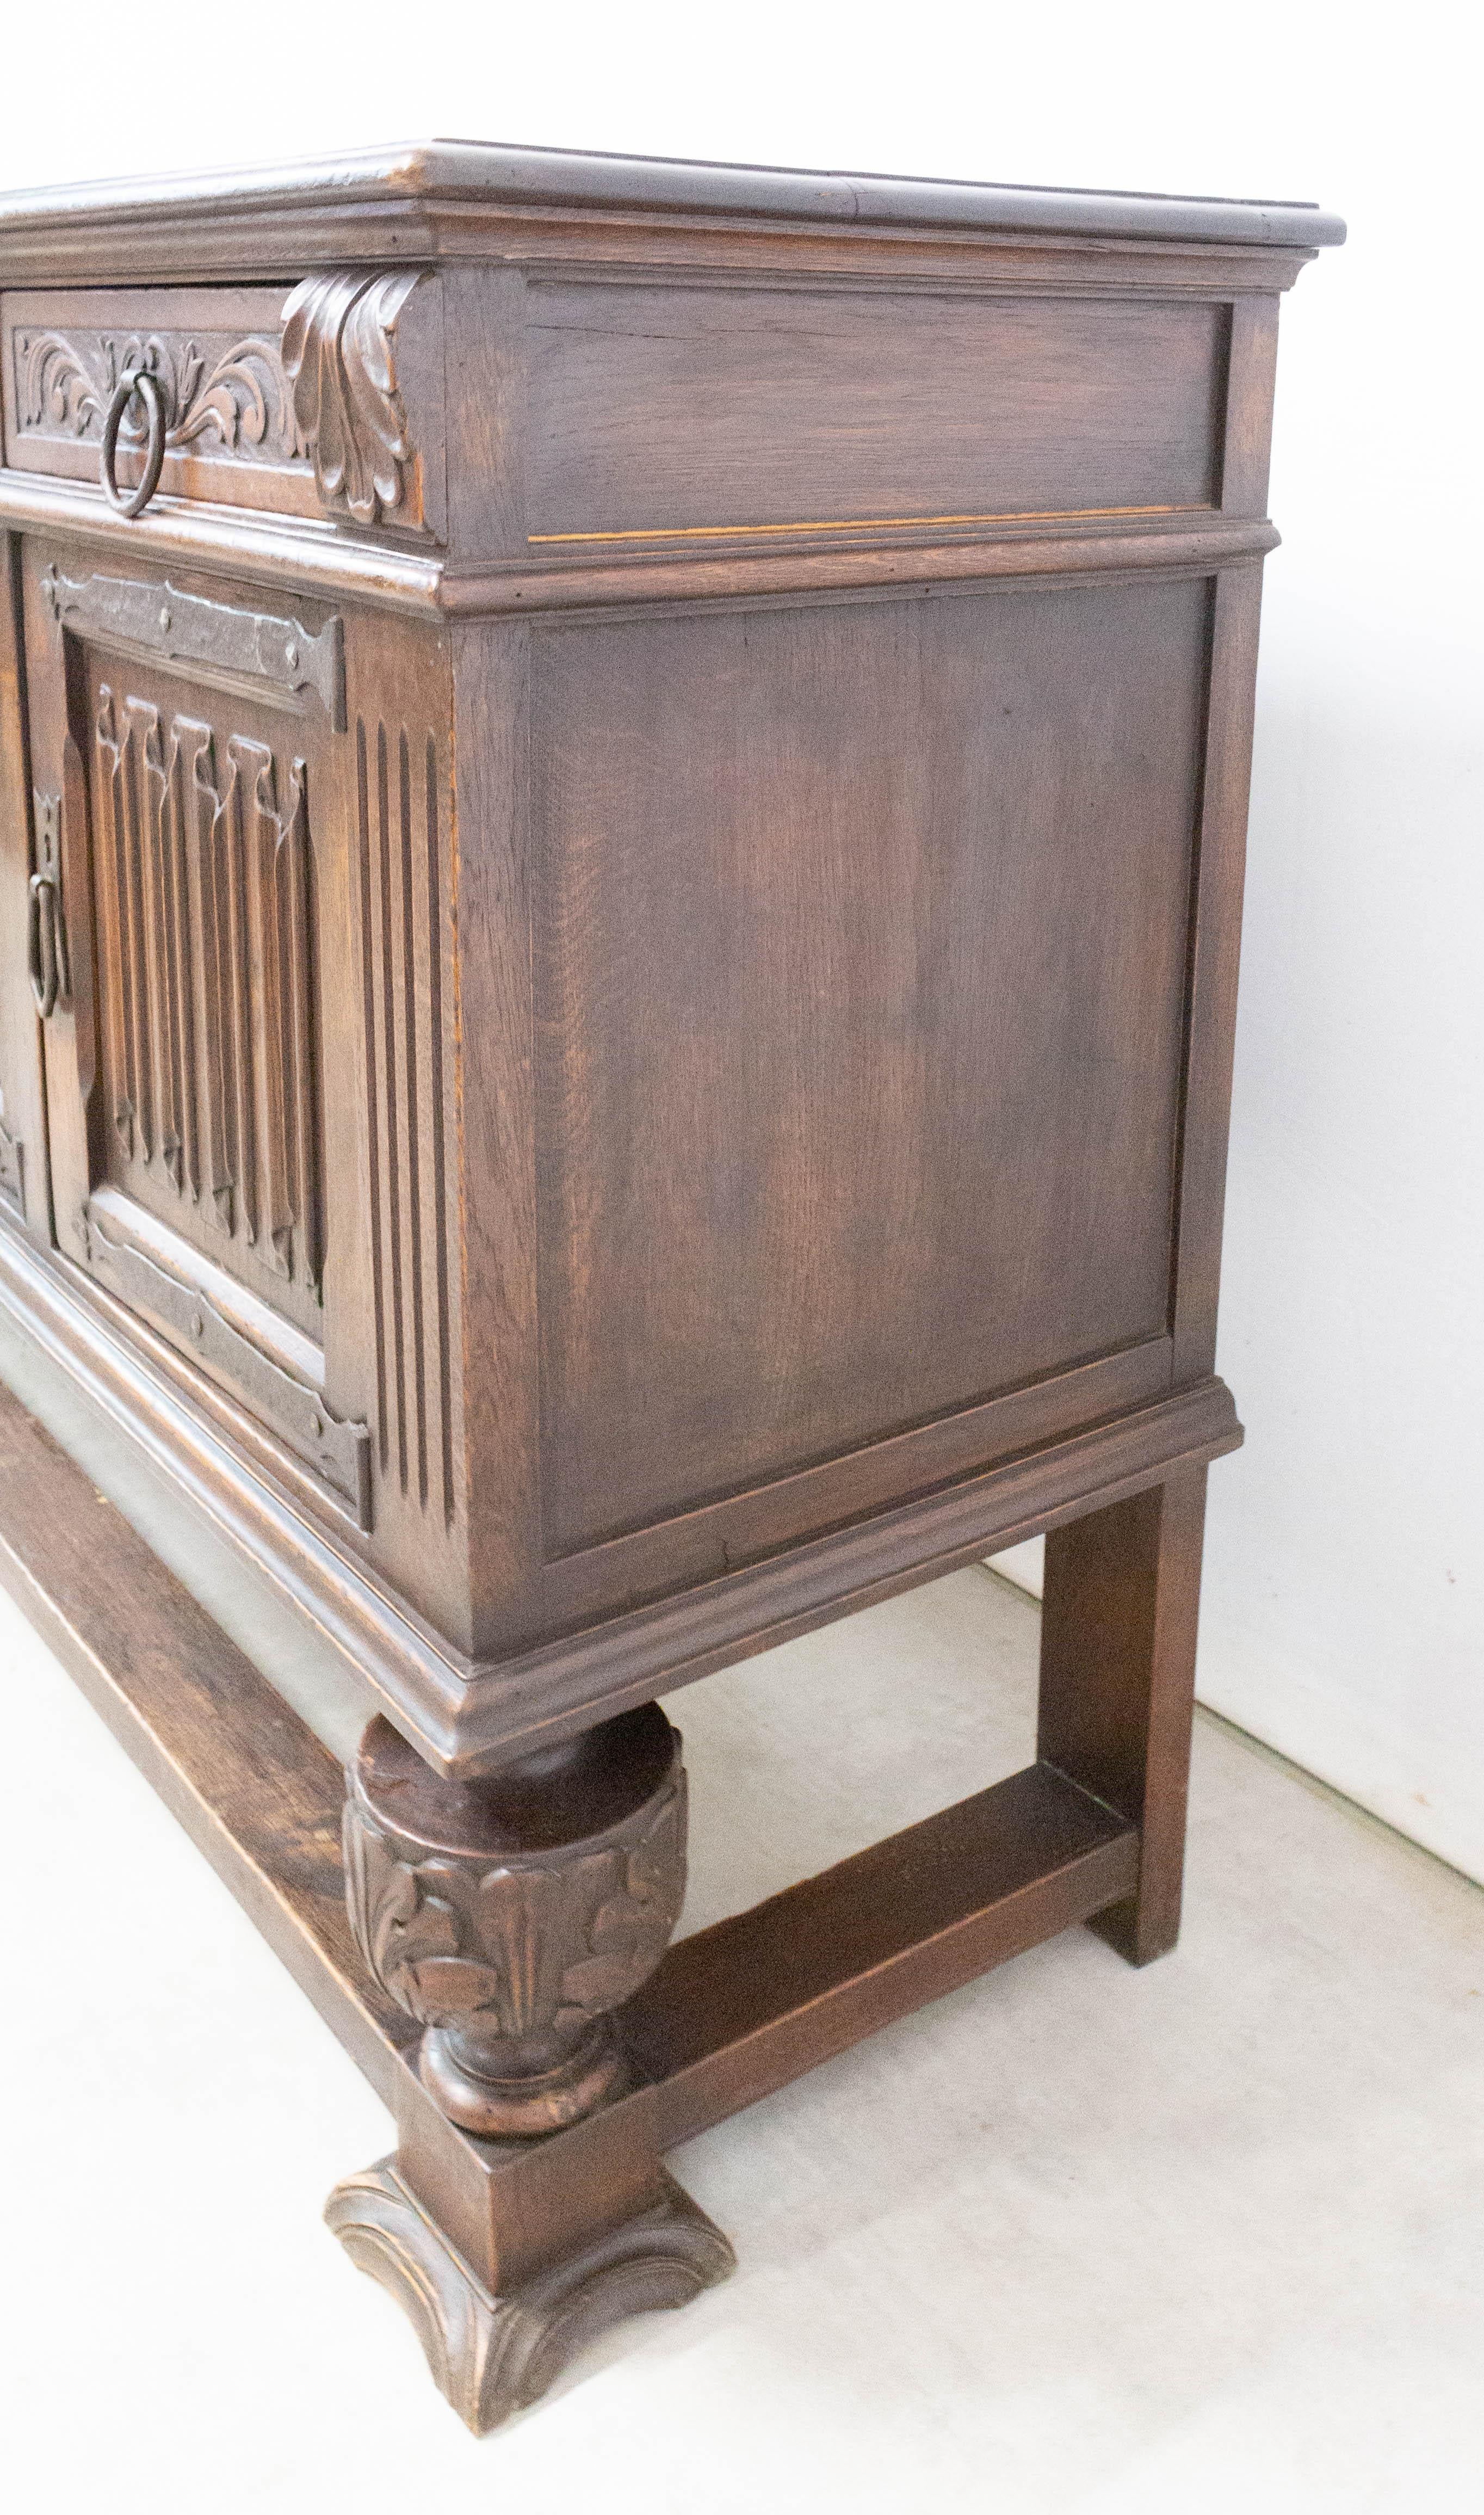 Sideboard Spanish credenza four doors buffet, circa 1920
Gothic Revival, solid oak
Please see also Credenza Sideboard Spanish Oak Two Doors Buffet Gothic Revival, circa 1920
Very good antique condition

Shipping: 
52/100/210 cm 94 kg.